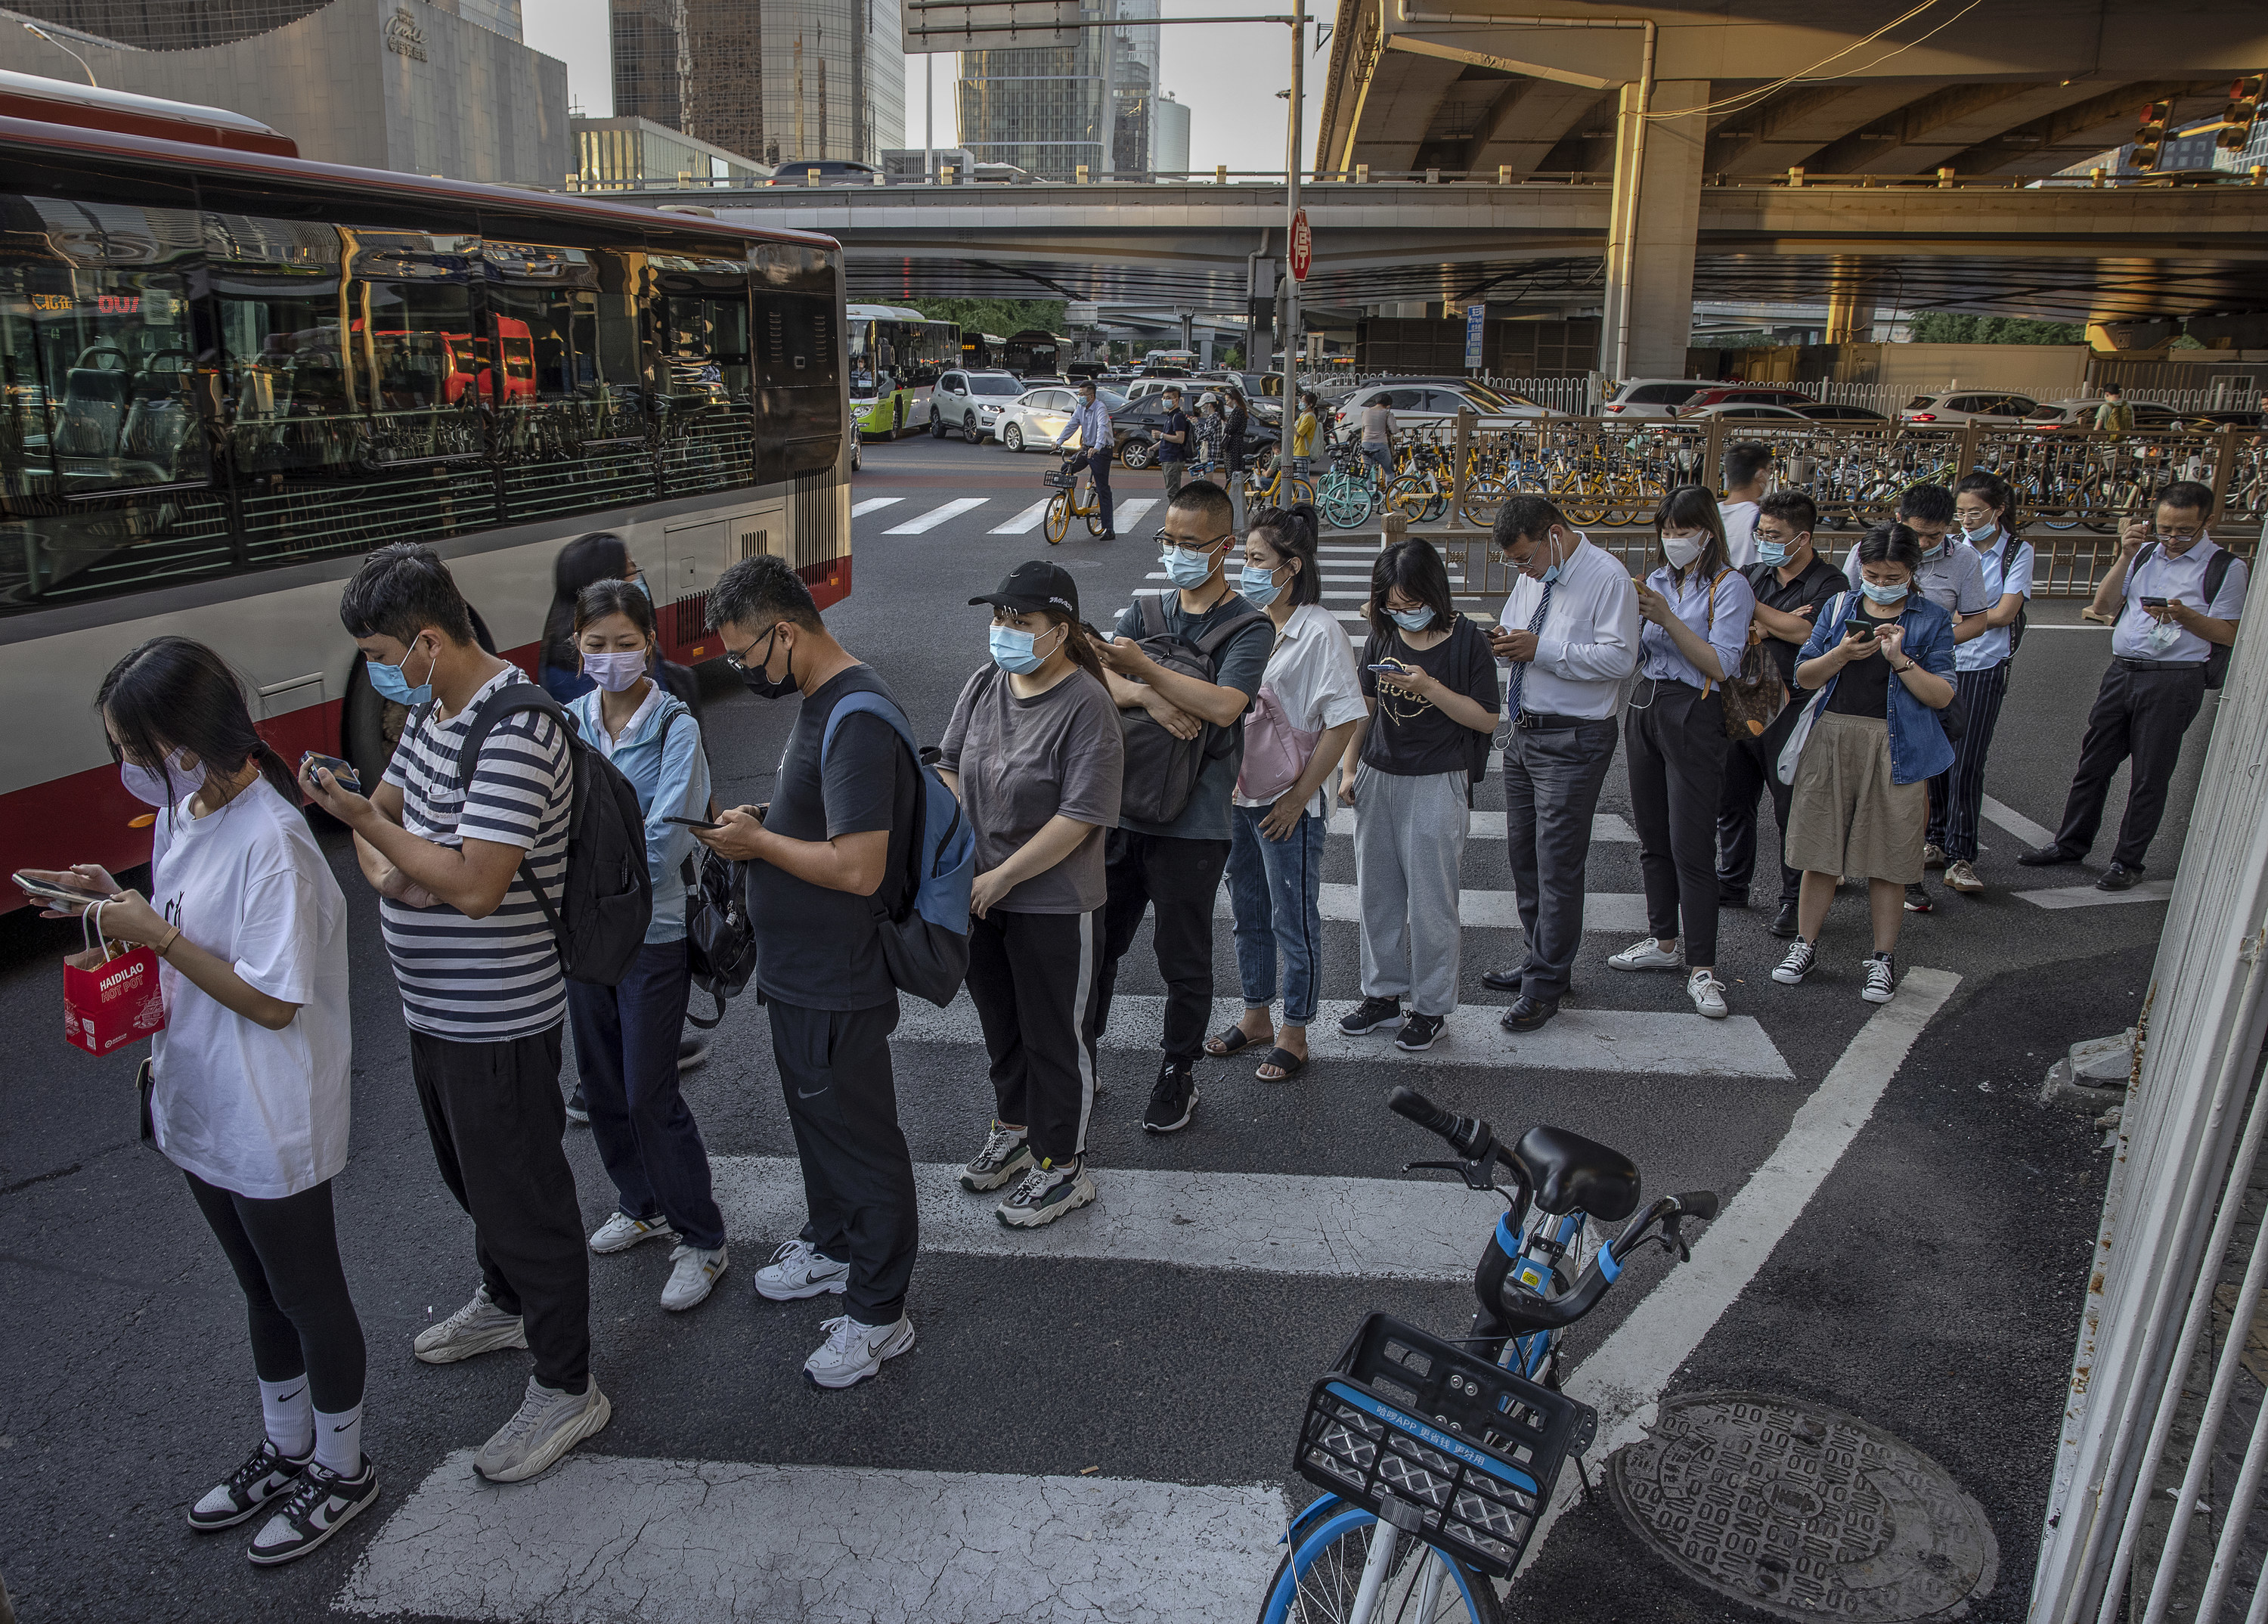 chinese commuters waiting in line for the bus after work